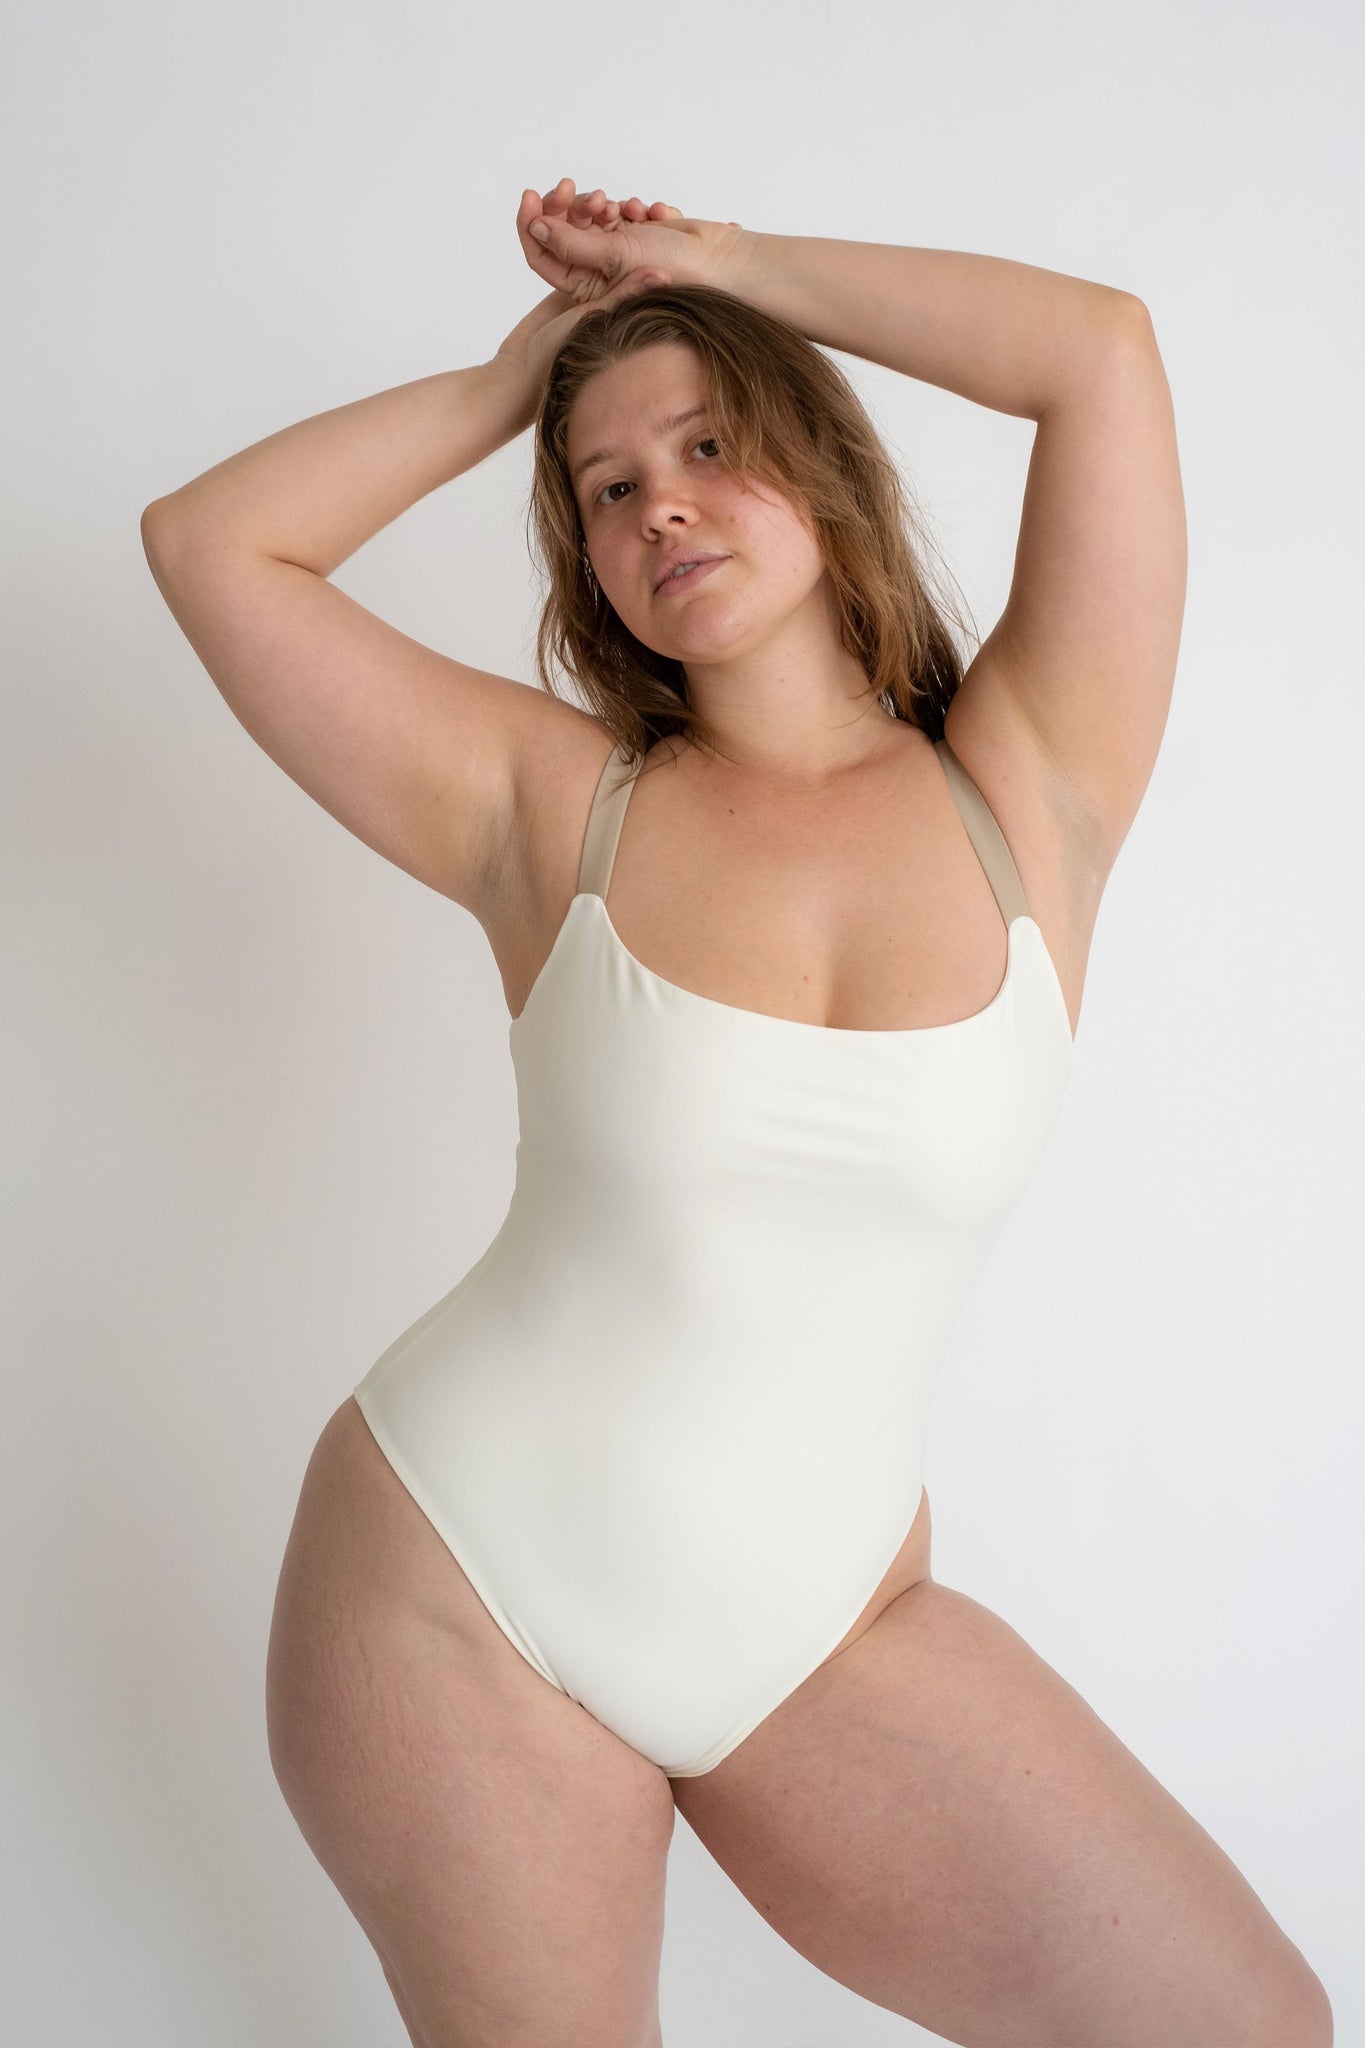 A woman standing with her hands above her head wearing a white one piece with thick nude spaghetti straps.